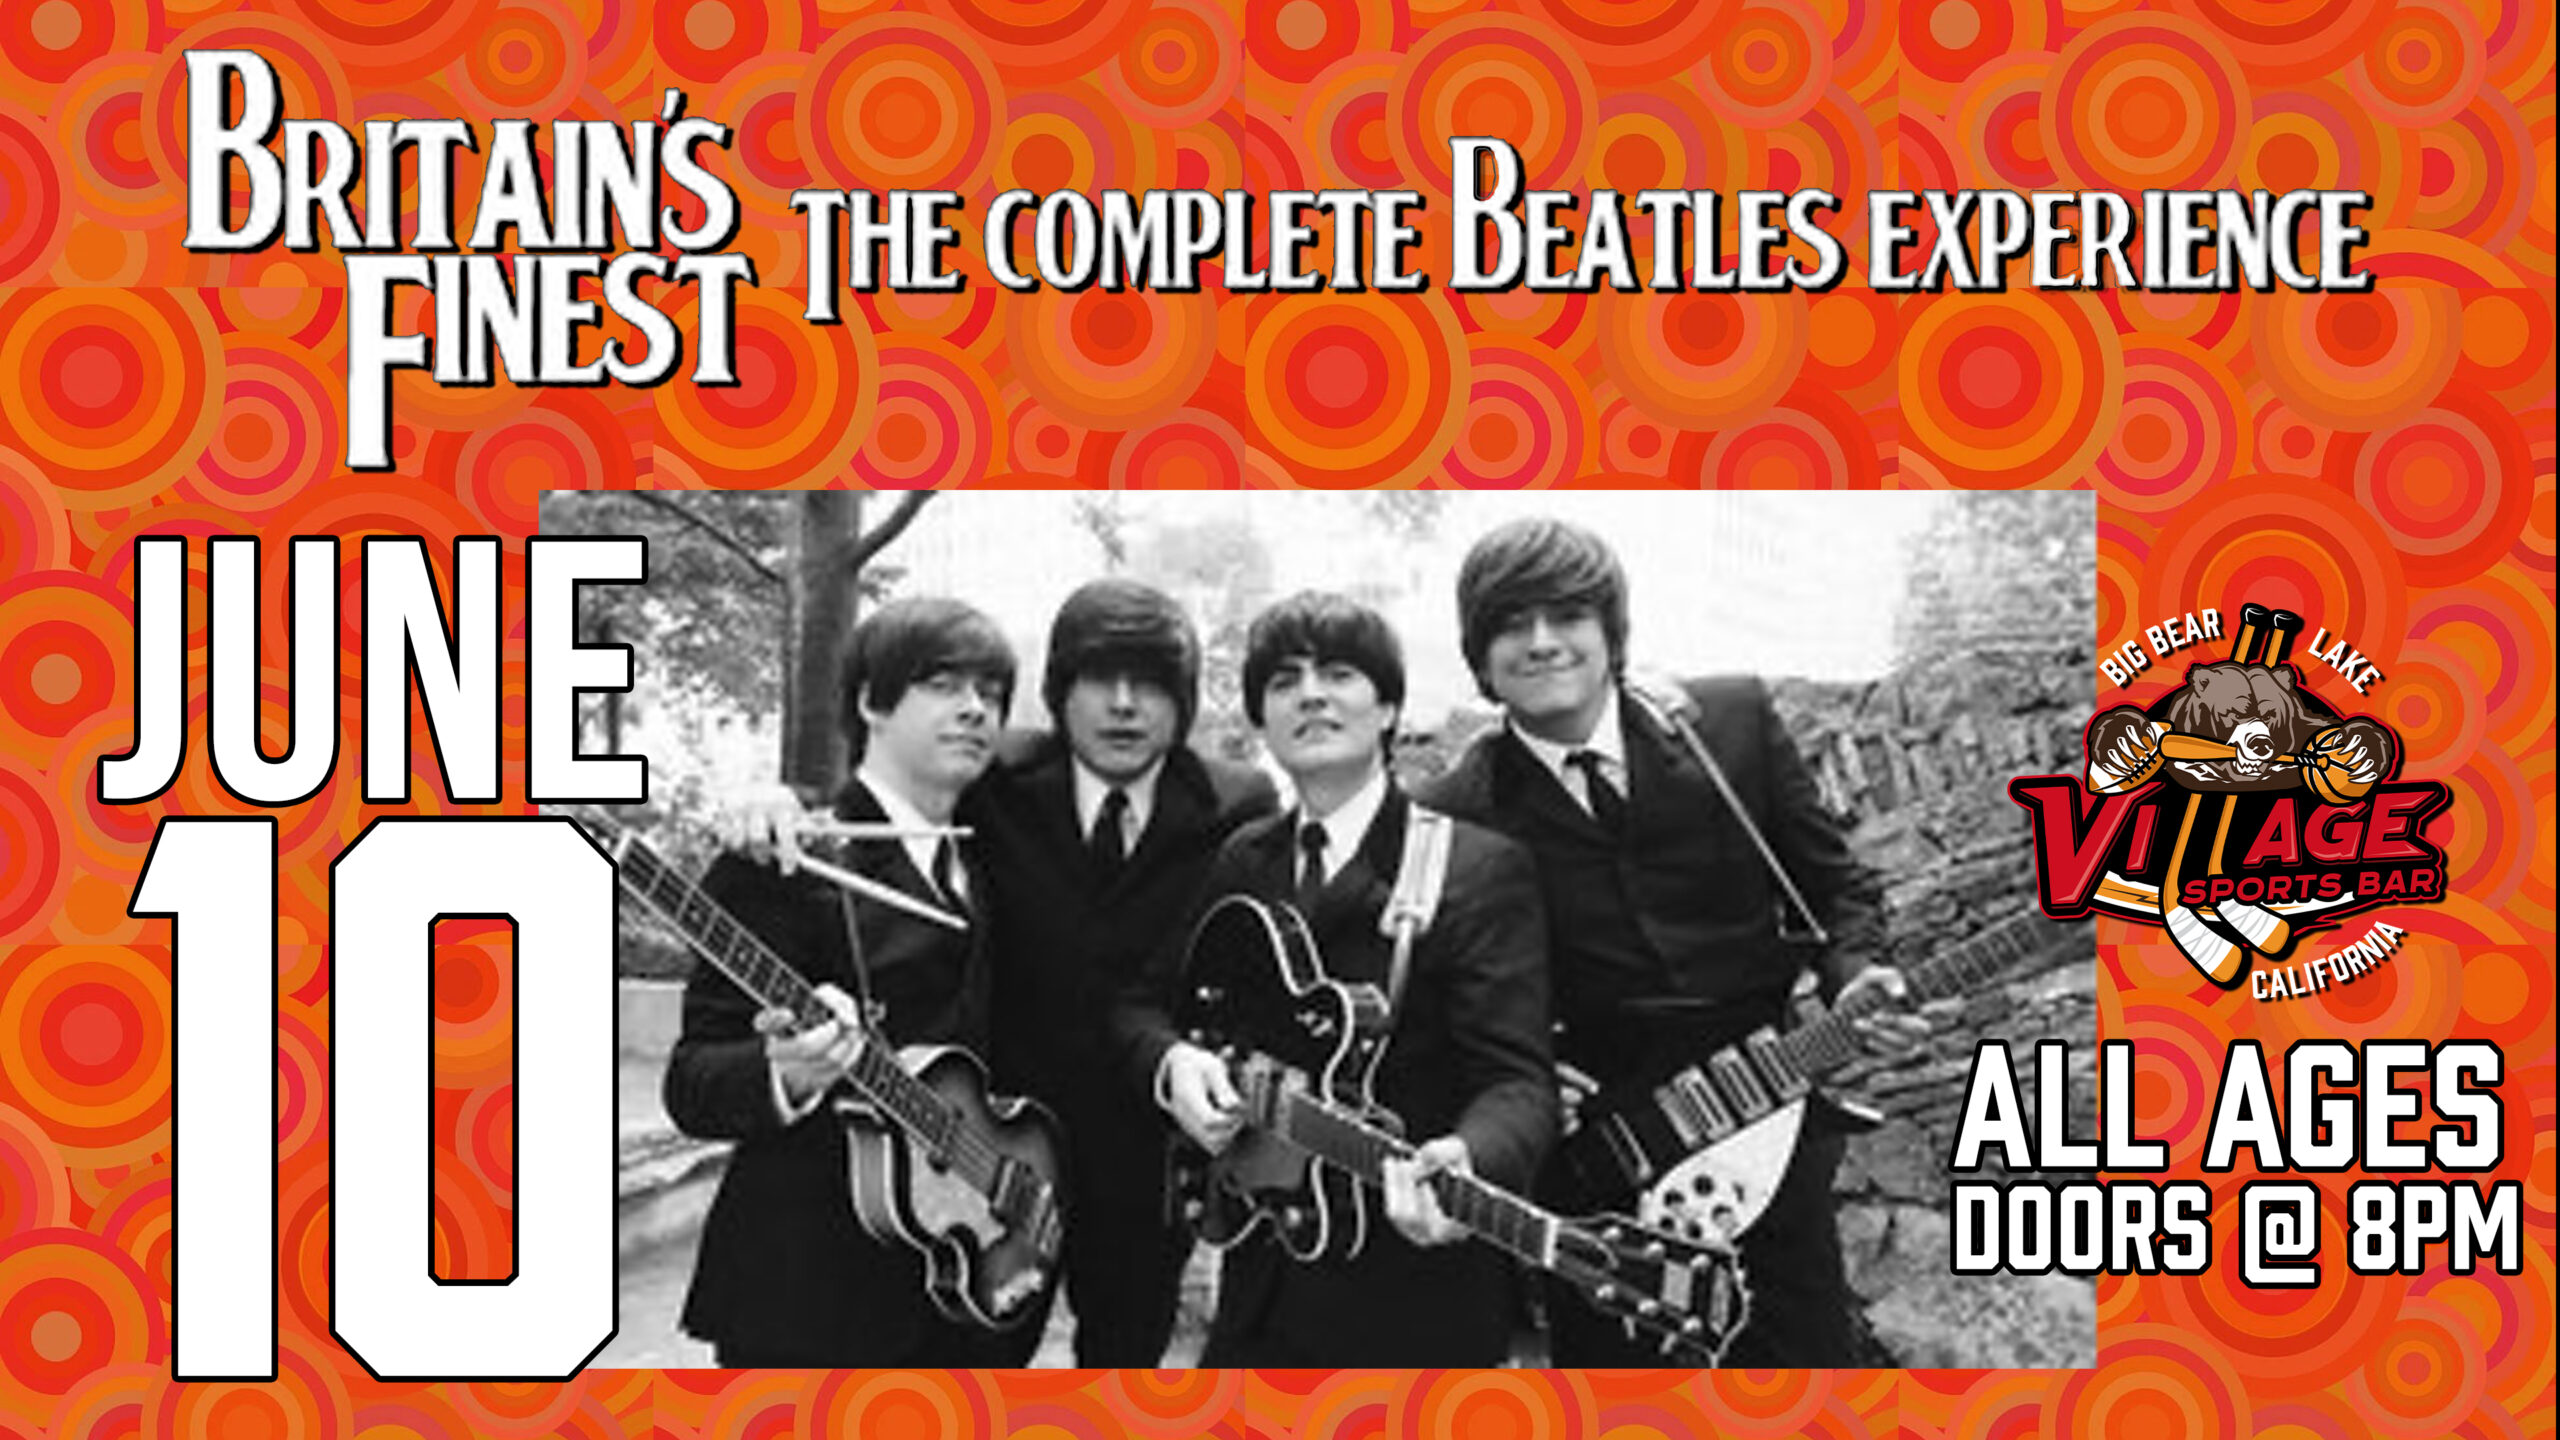 Village Sports Bar Presents: Britain's Finest - Tribute to The Beatles